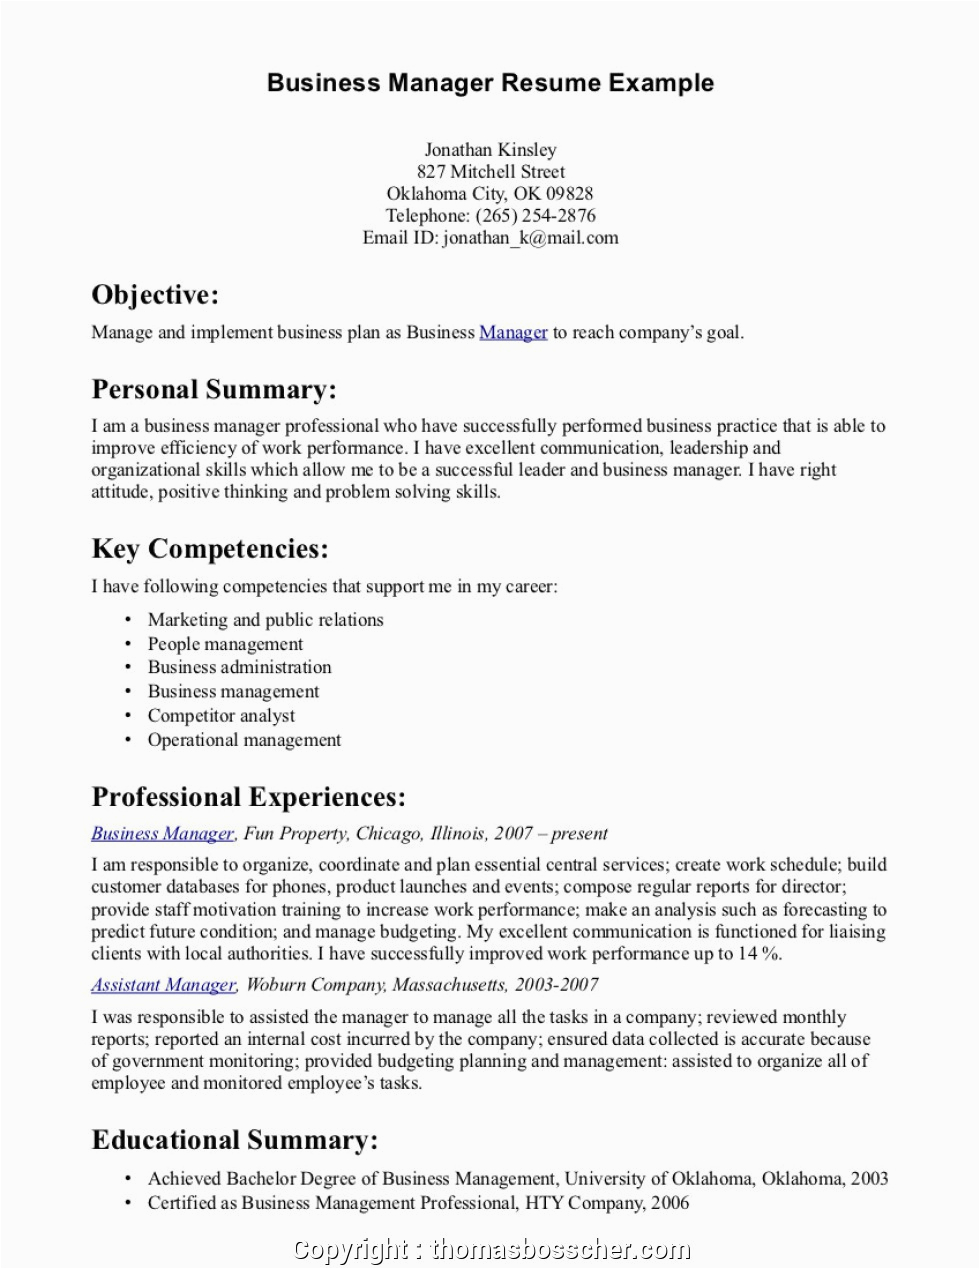 Sample Resume for Business Administration Student Modern Free Business Management Resume Templates Business